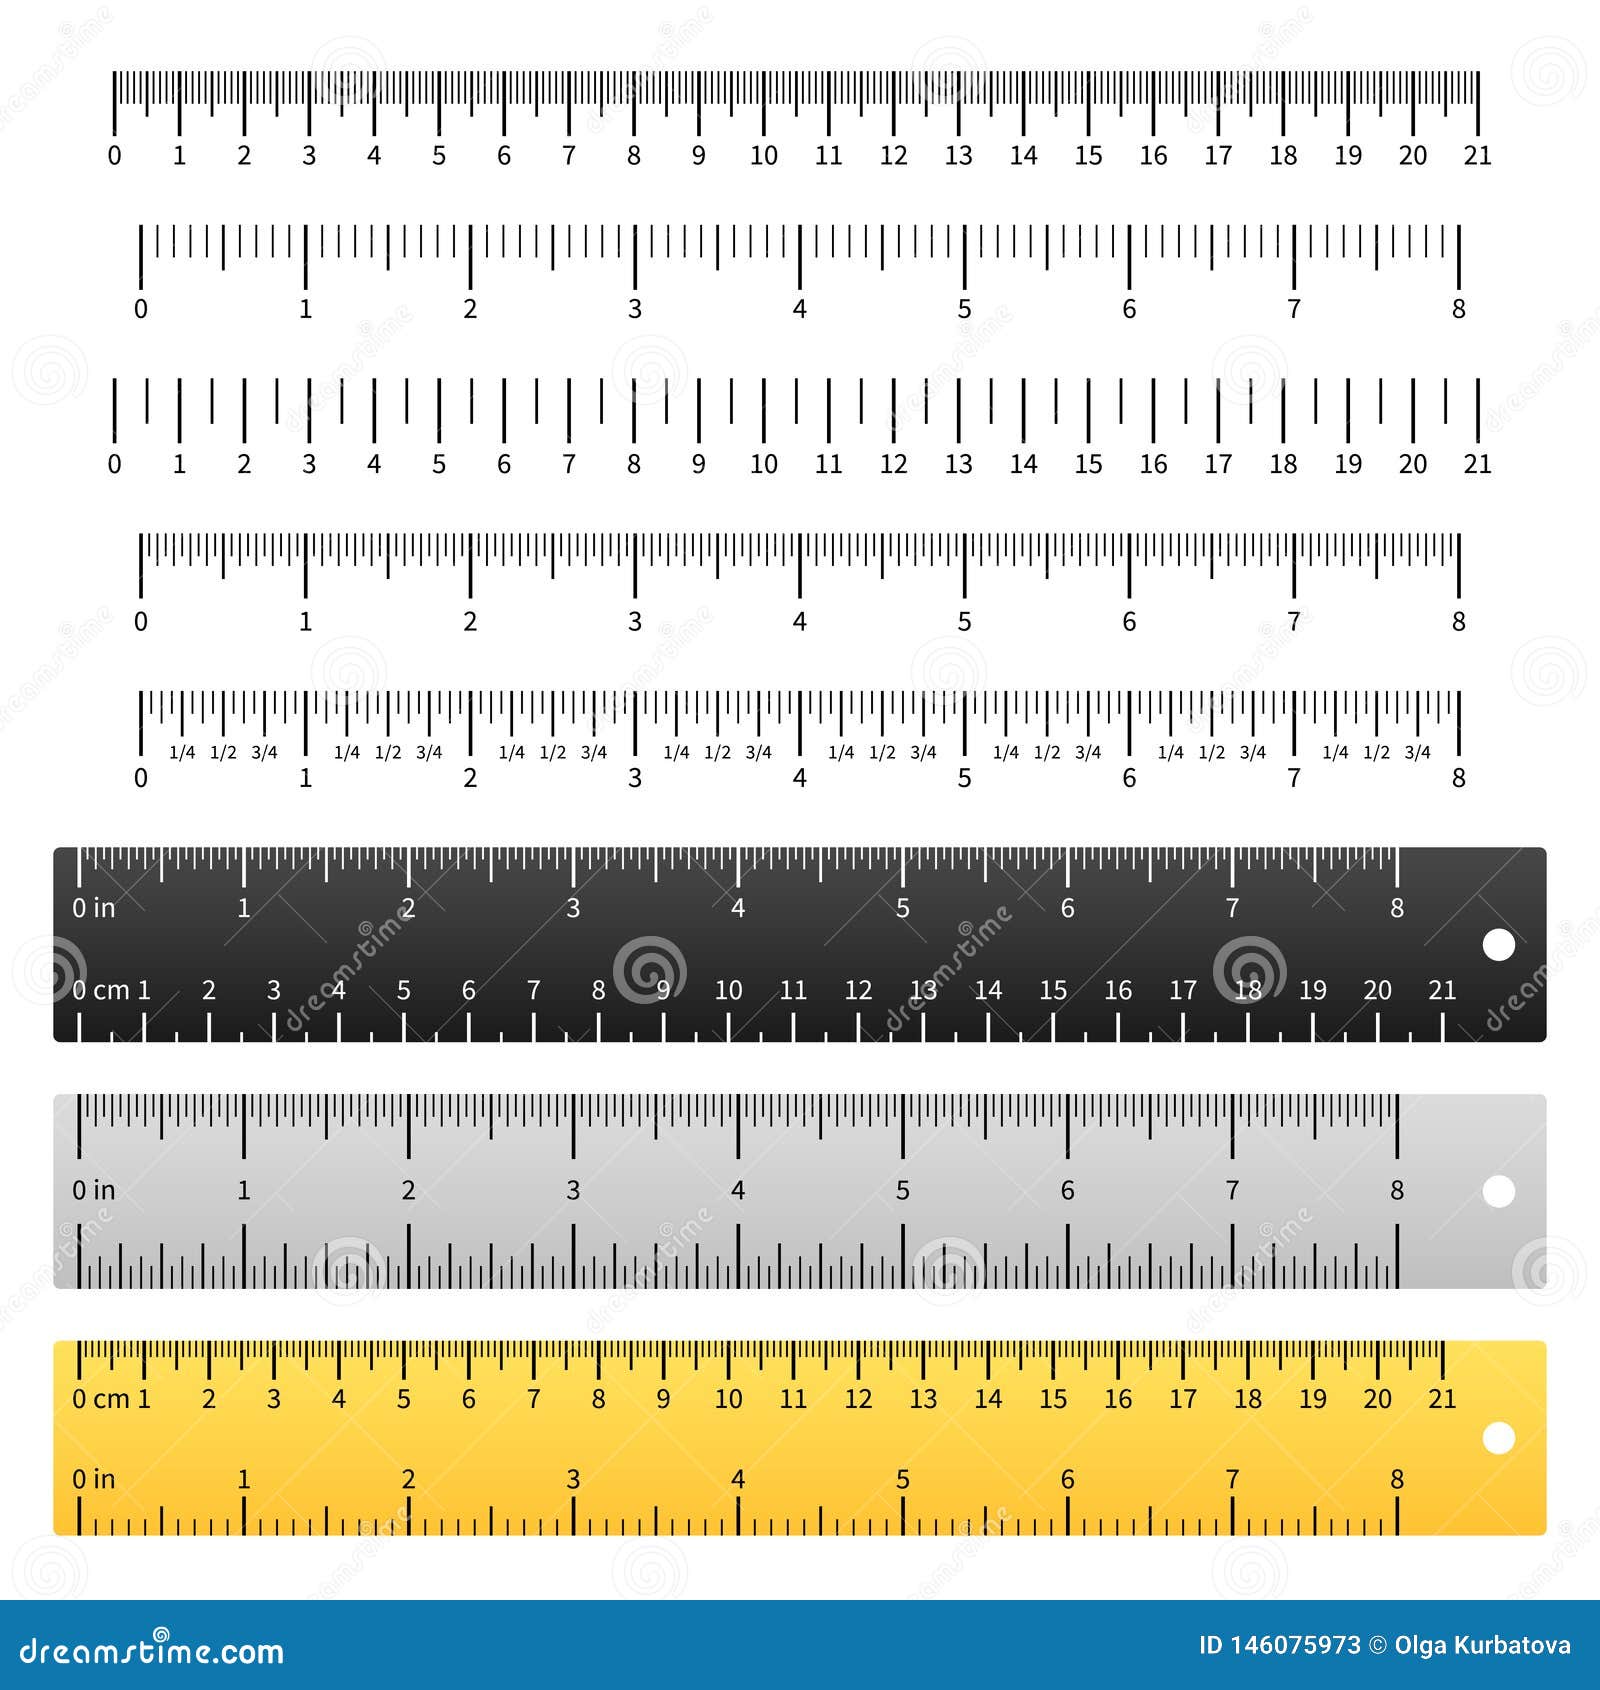 Printable Ruler Measurement Guideline With Decimals Metric Ruler Guide Ruler  Measurements Ruler Guideline Measurement Guideline 